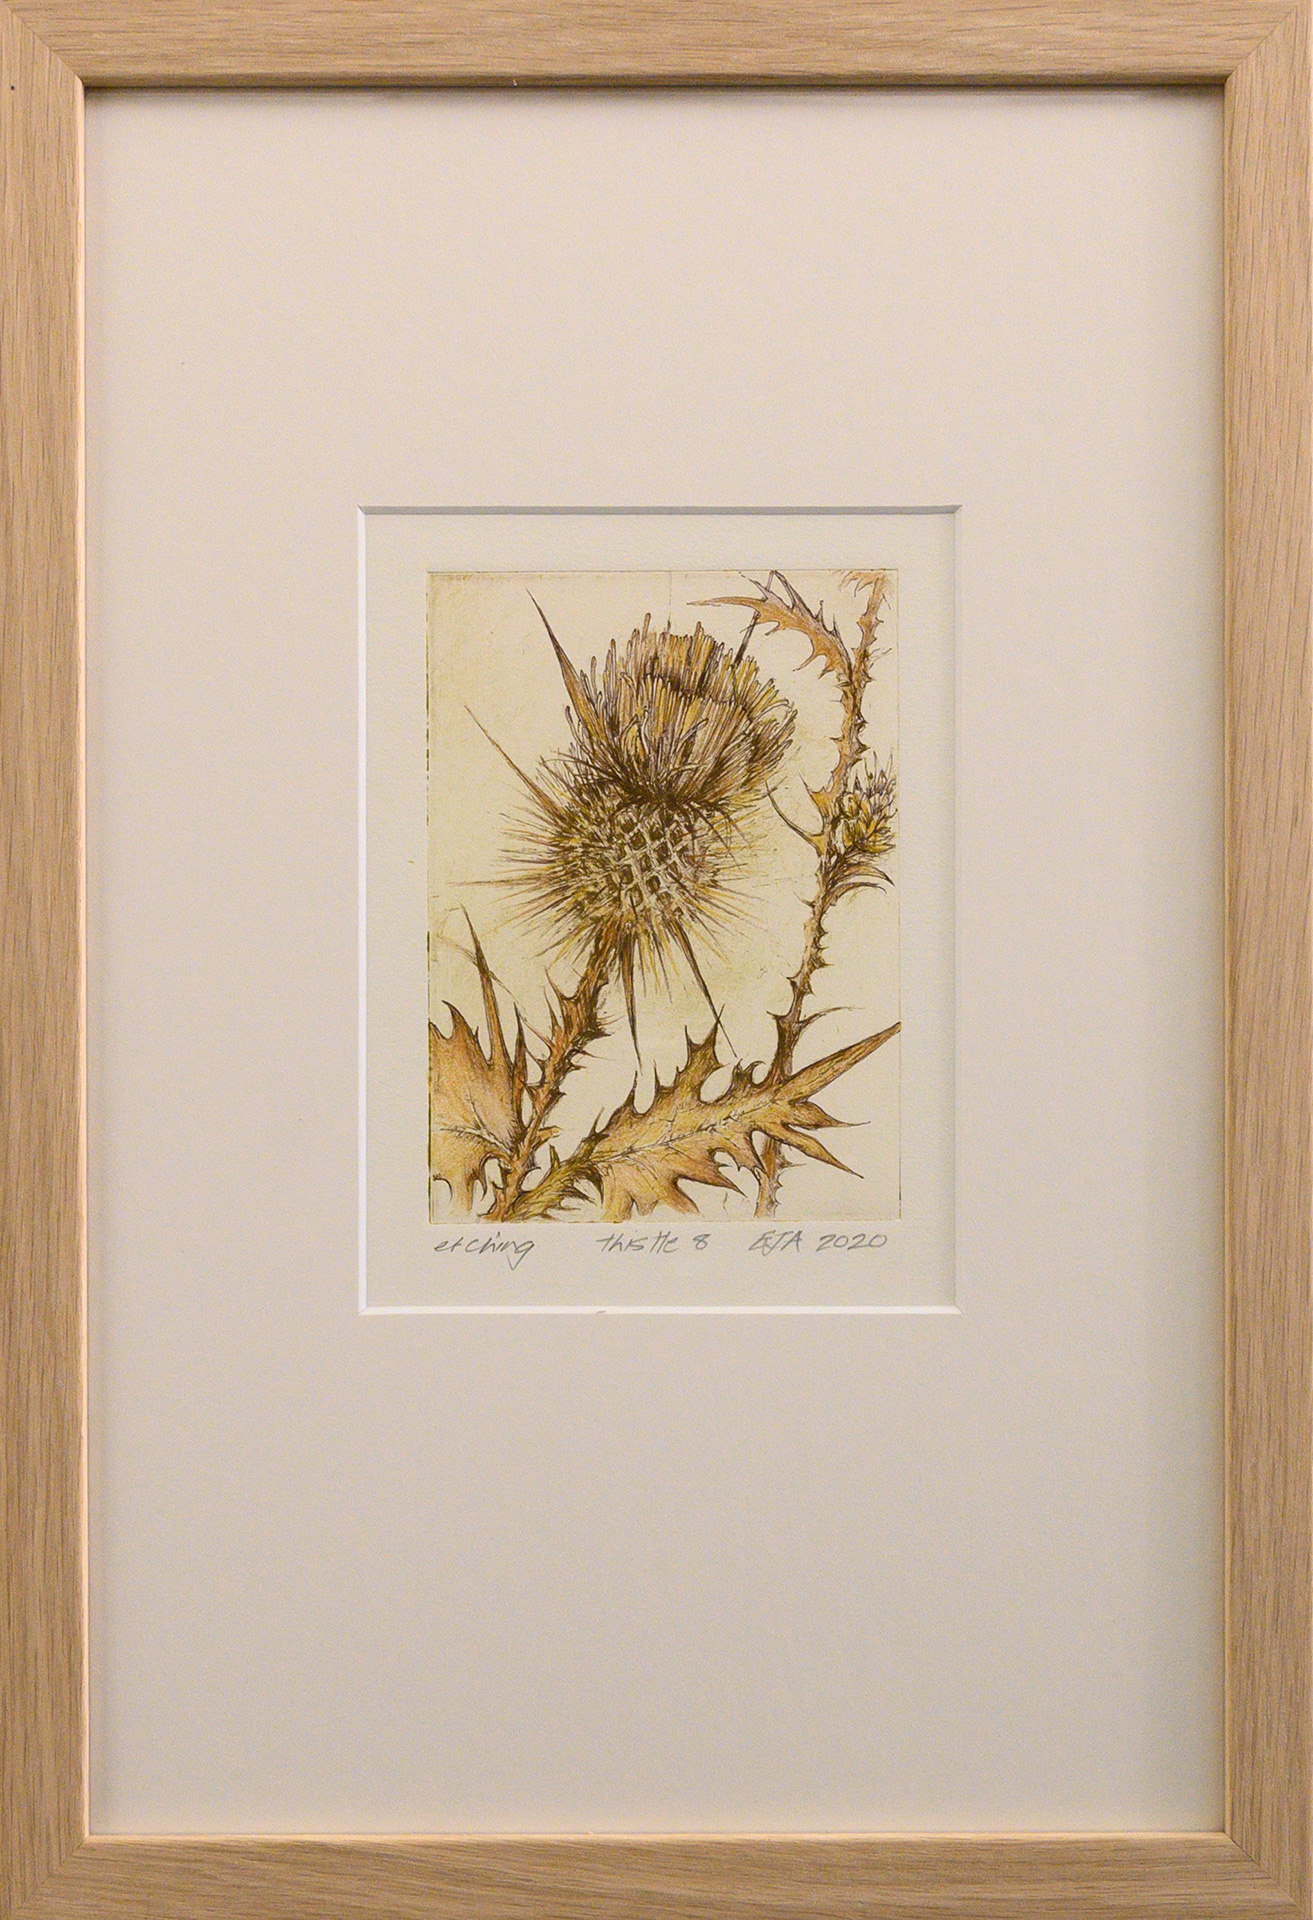 Framed artwork by Libby Altschwager of a close up of a brown Scotch Thistle